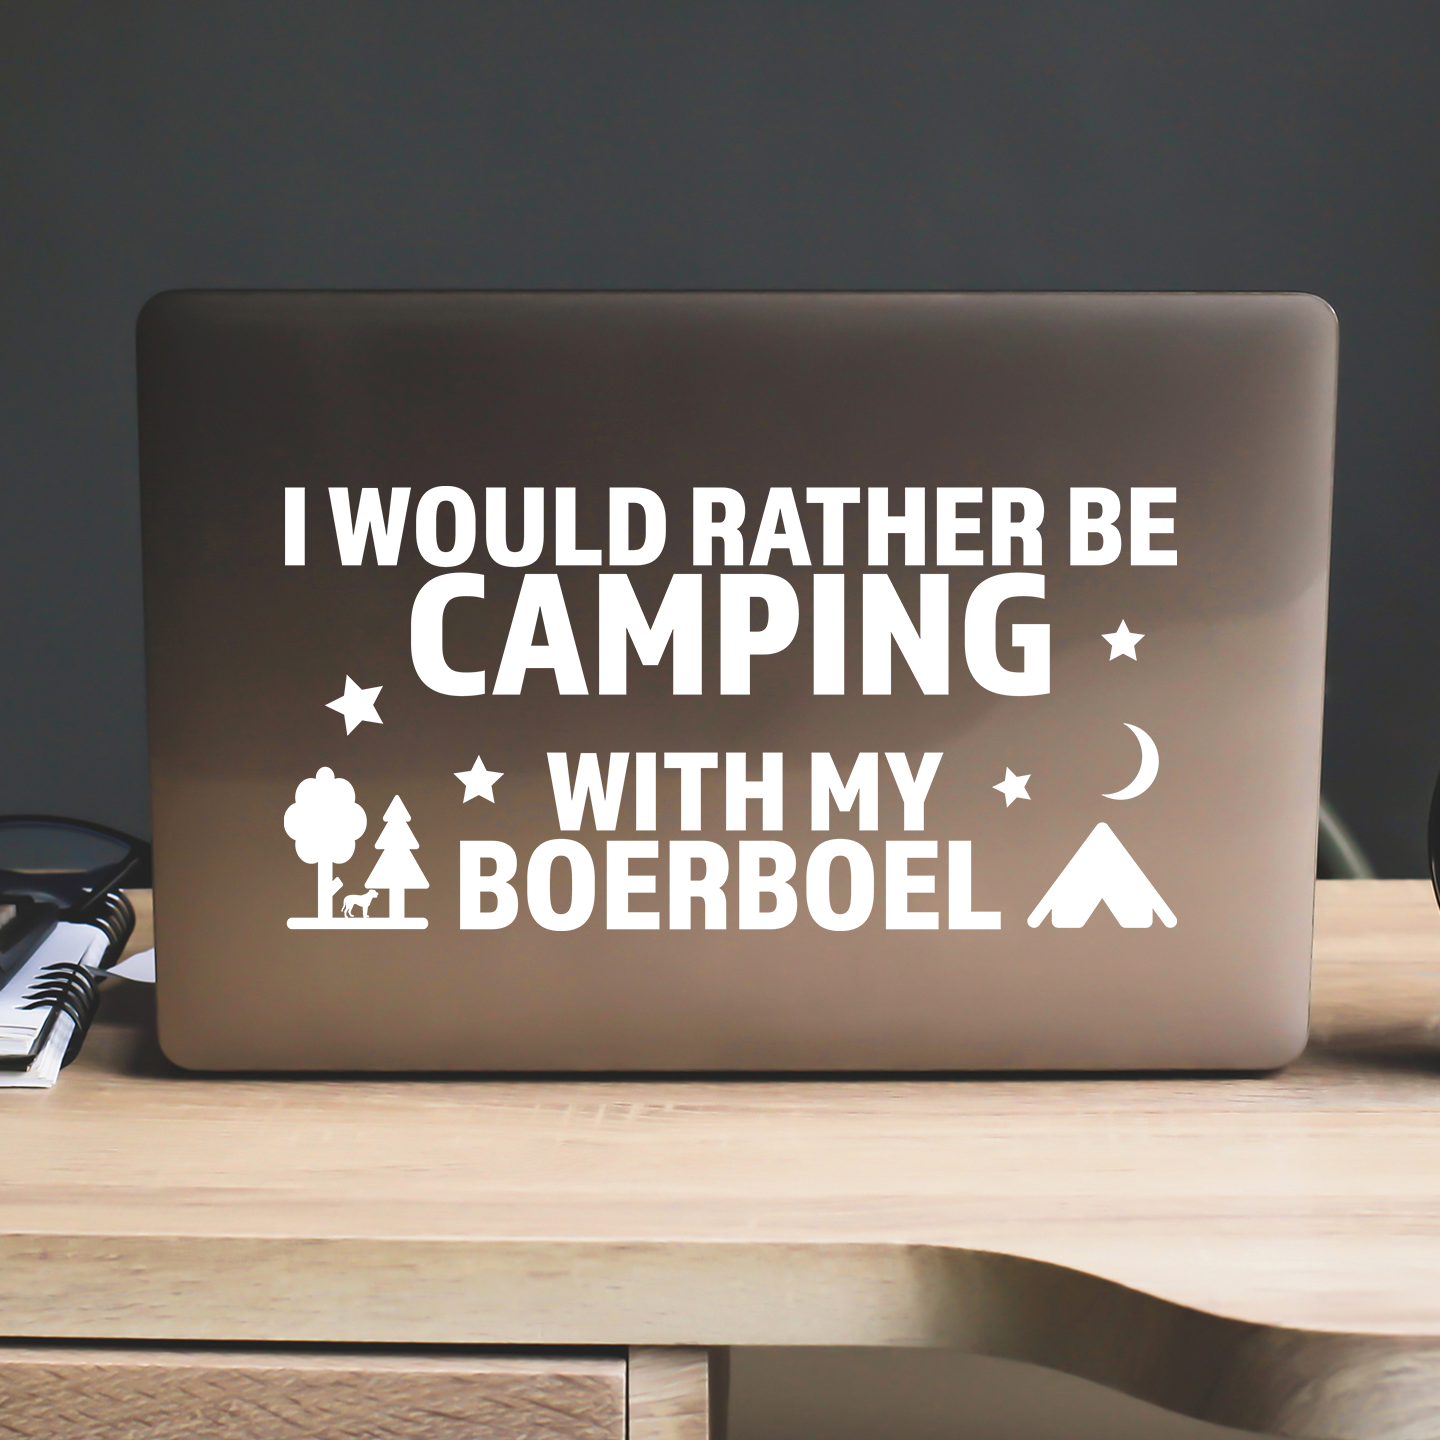 I Would Rather Be Camping With My Boerboel Sticker